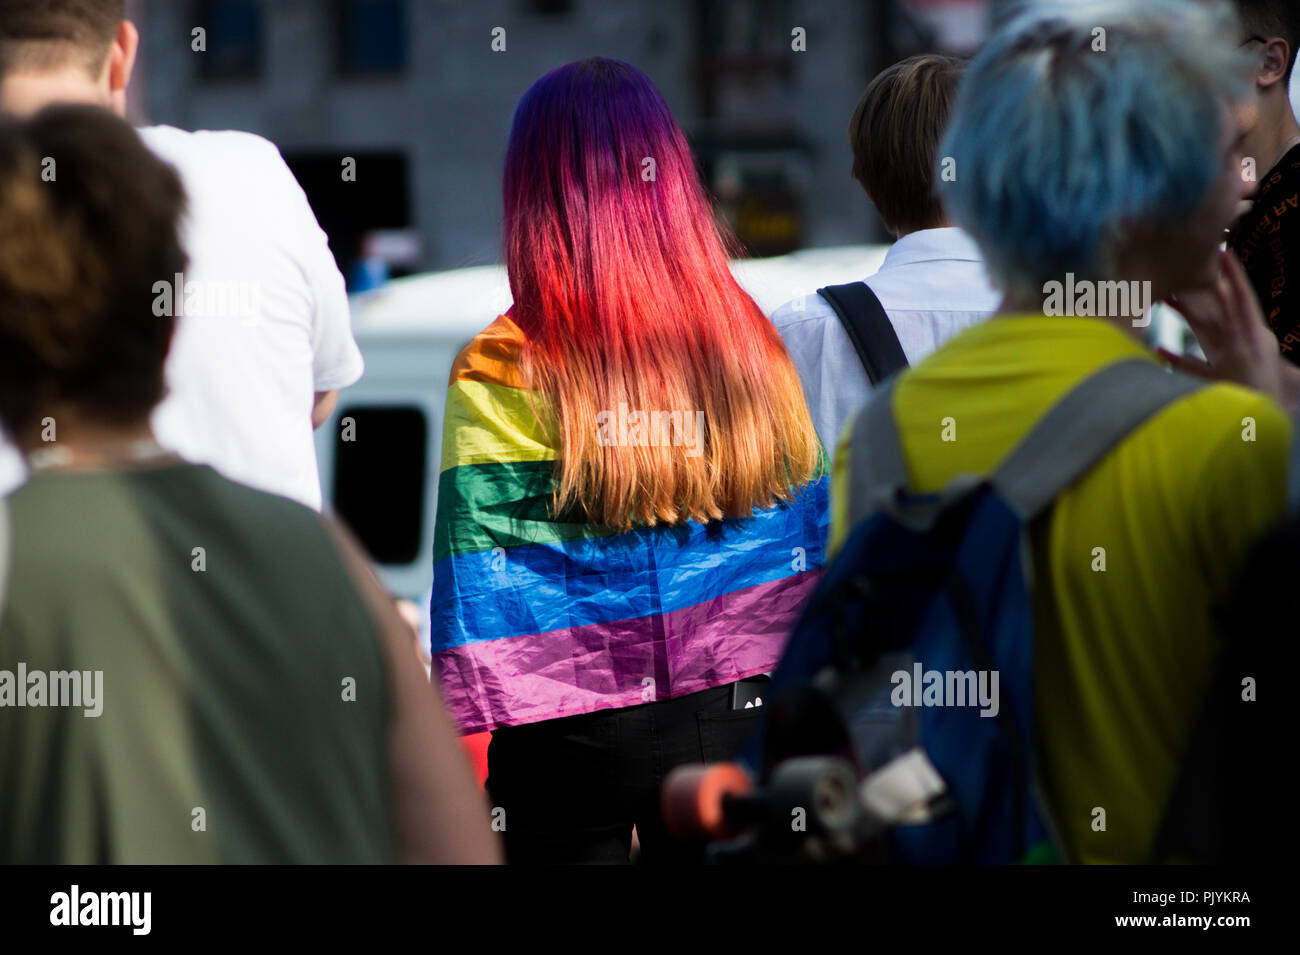 Moscow, Russia. 9th Sept 2018. A young woman with dyed hair is showing her support for the LGBT movement by wearing a rainbow-coloured flag during an anti-government rally in Moscow where Russian opposition activists gathered to express resentment about an upcoming pension refrom. Credit: Roman Chukanov/Alamy Live News Stock Photo